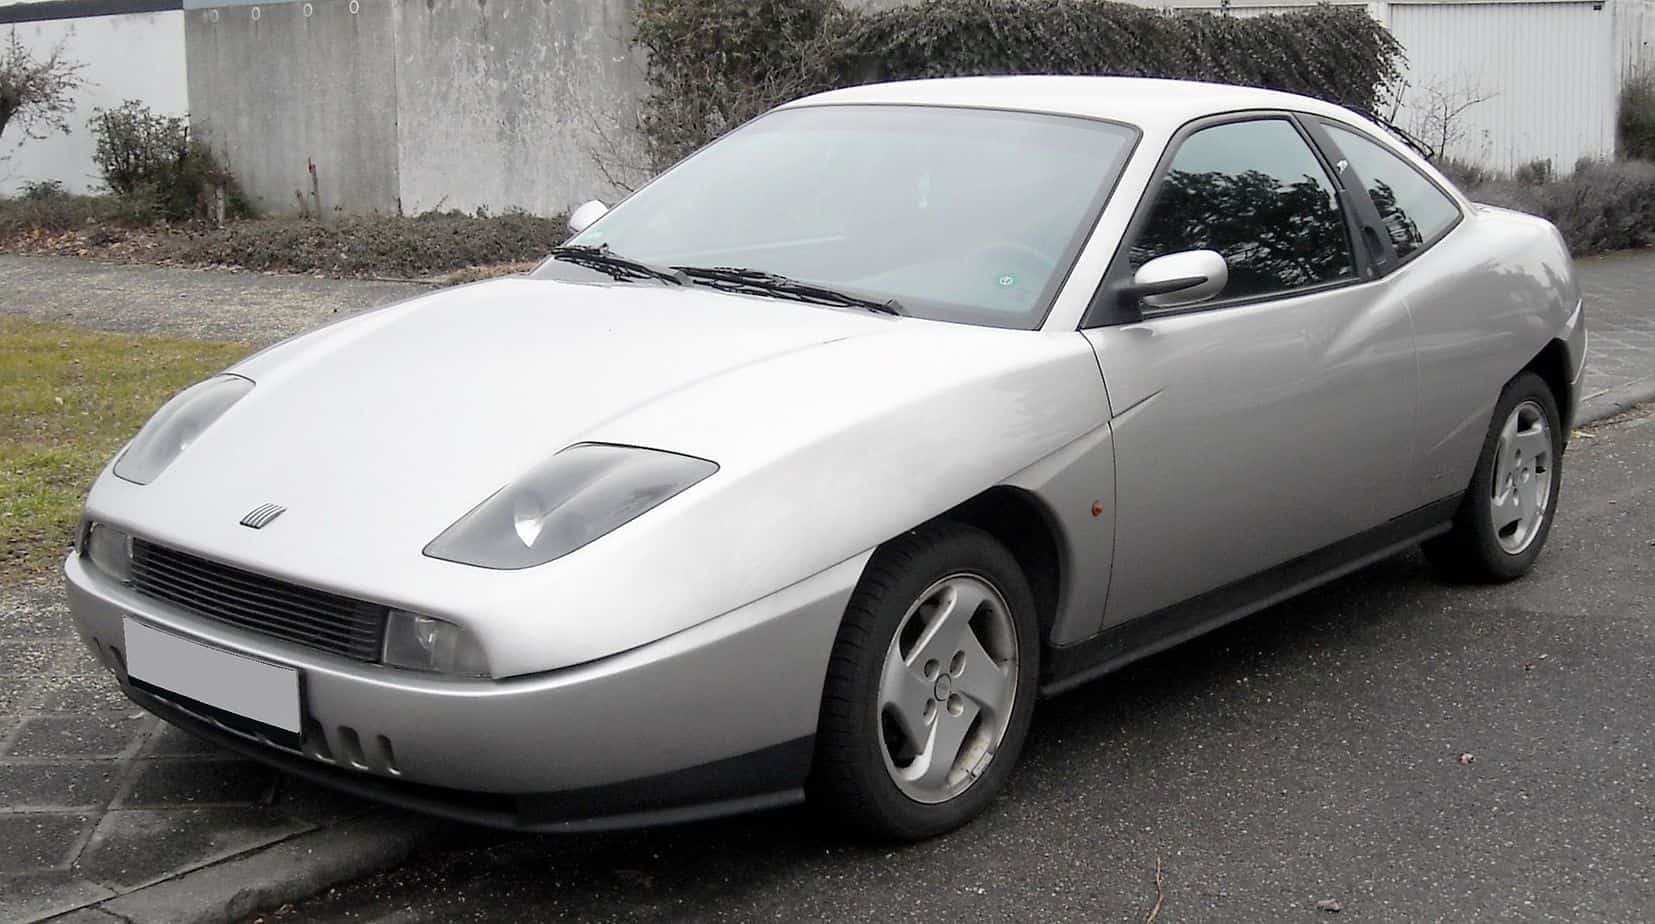 Fiat Coupe – is this car already a classic of motoring?